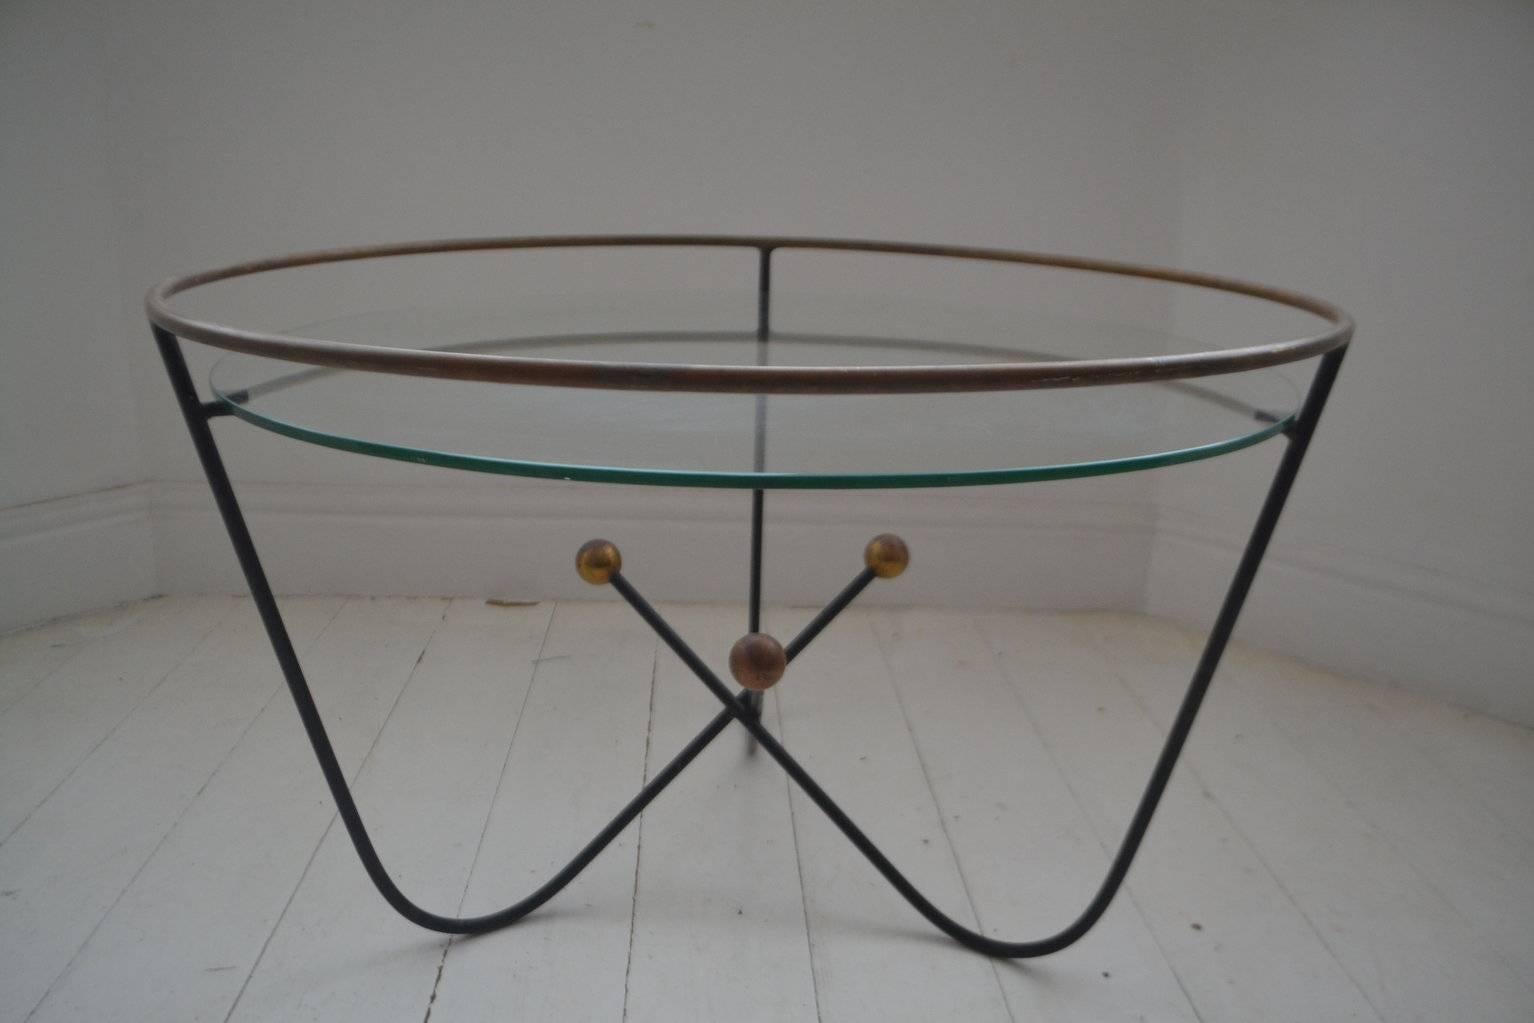 Atomic coffee table designed by Edward Ihnatowicz for Mars Furniture, U.K, circa 1950. Brass, steel rod and glass atomic sculpture.